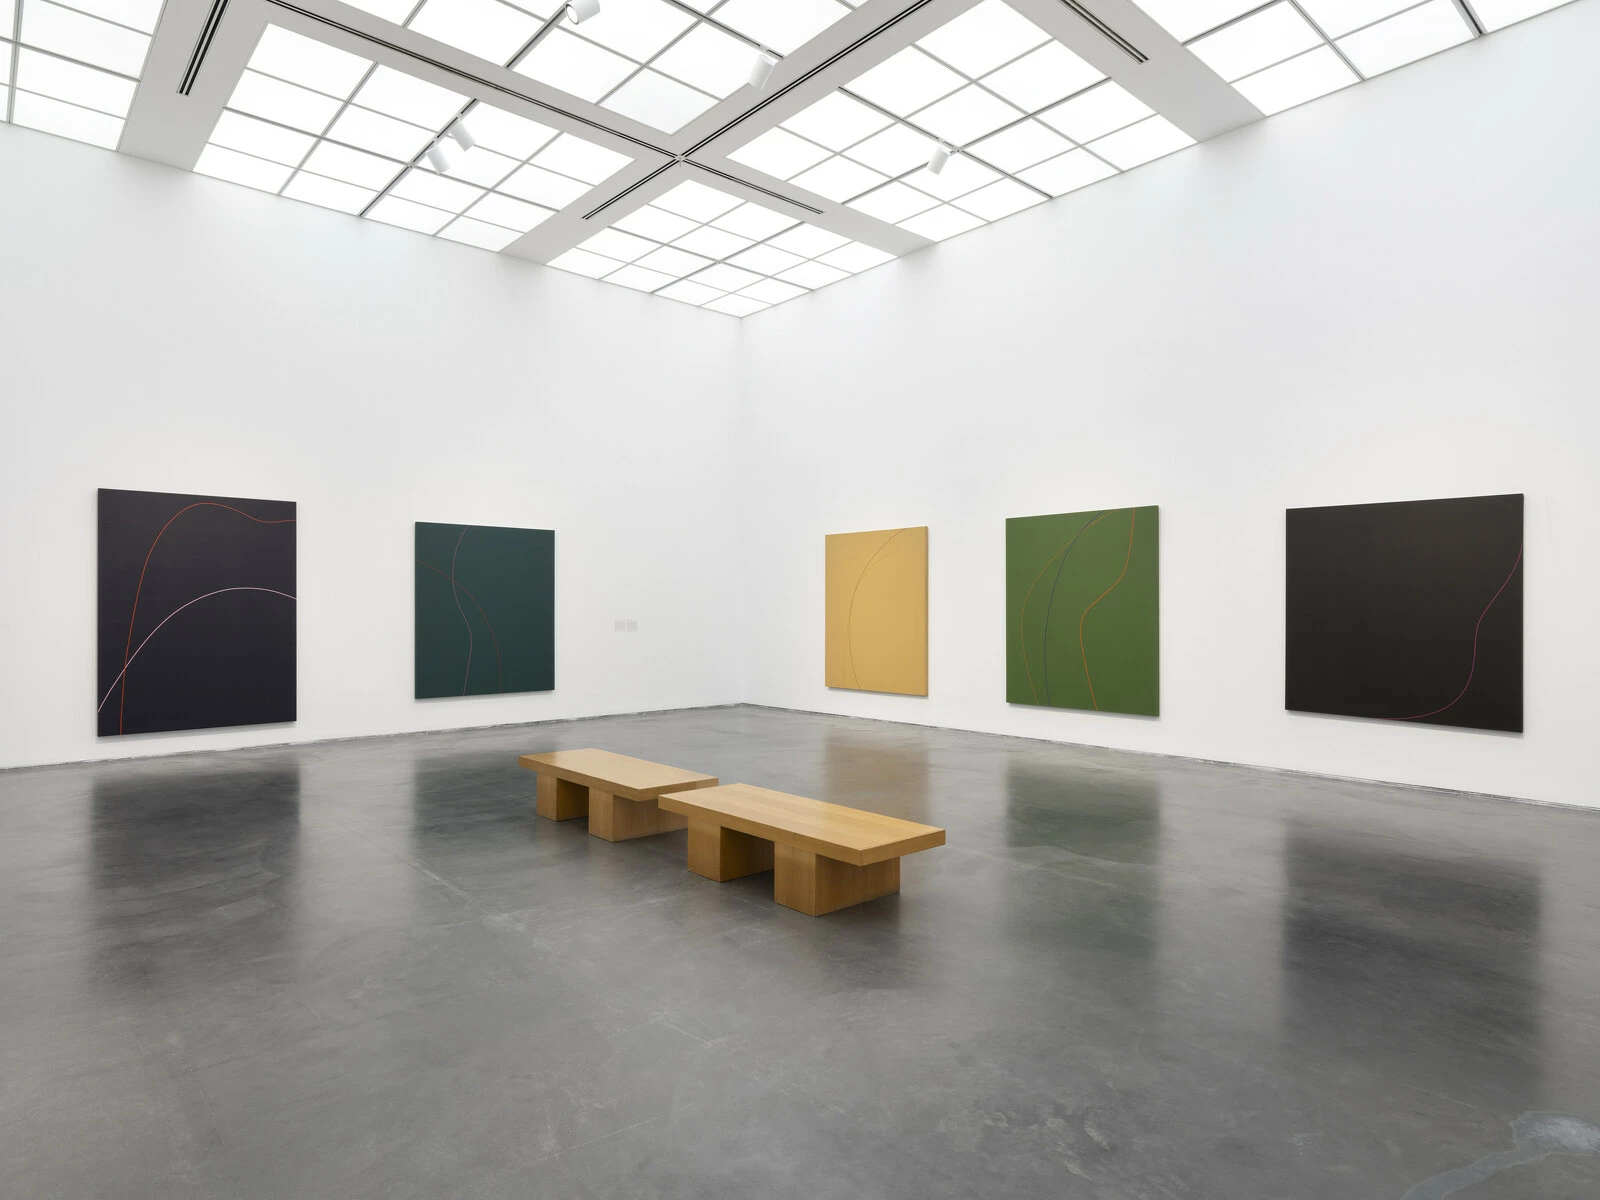 Gallery with five large abstract paintings hung on the walls and a wooden bench in the middle of the room